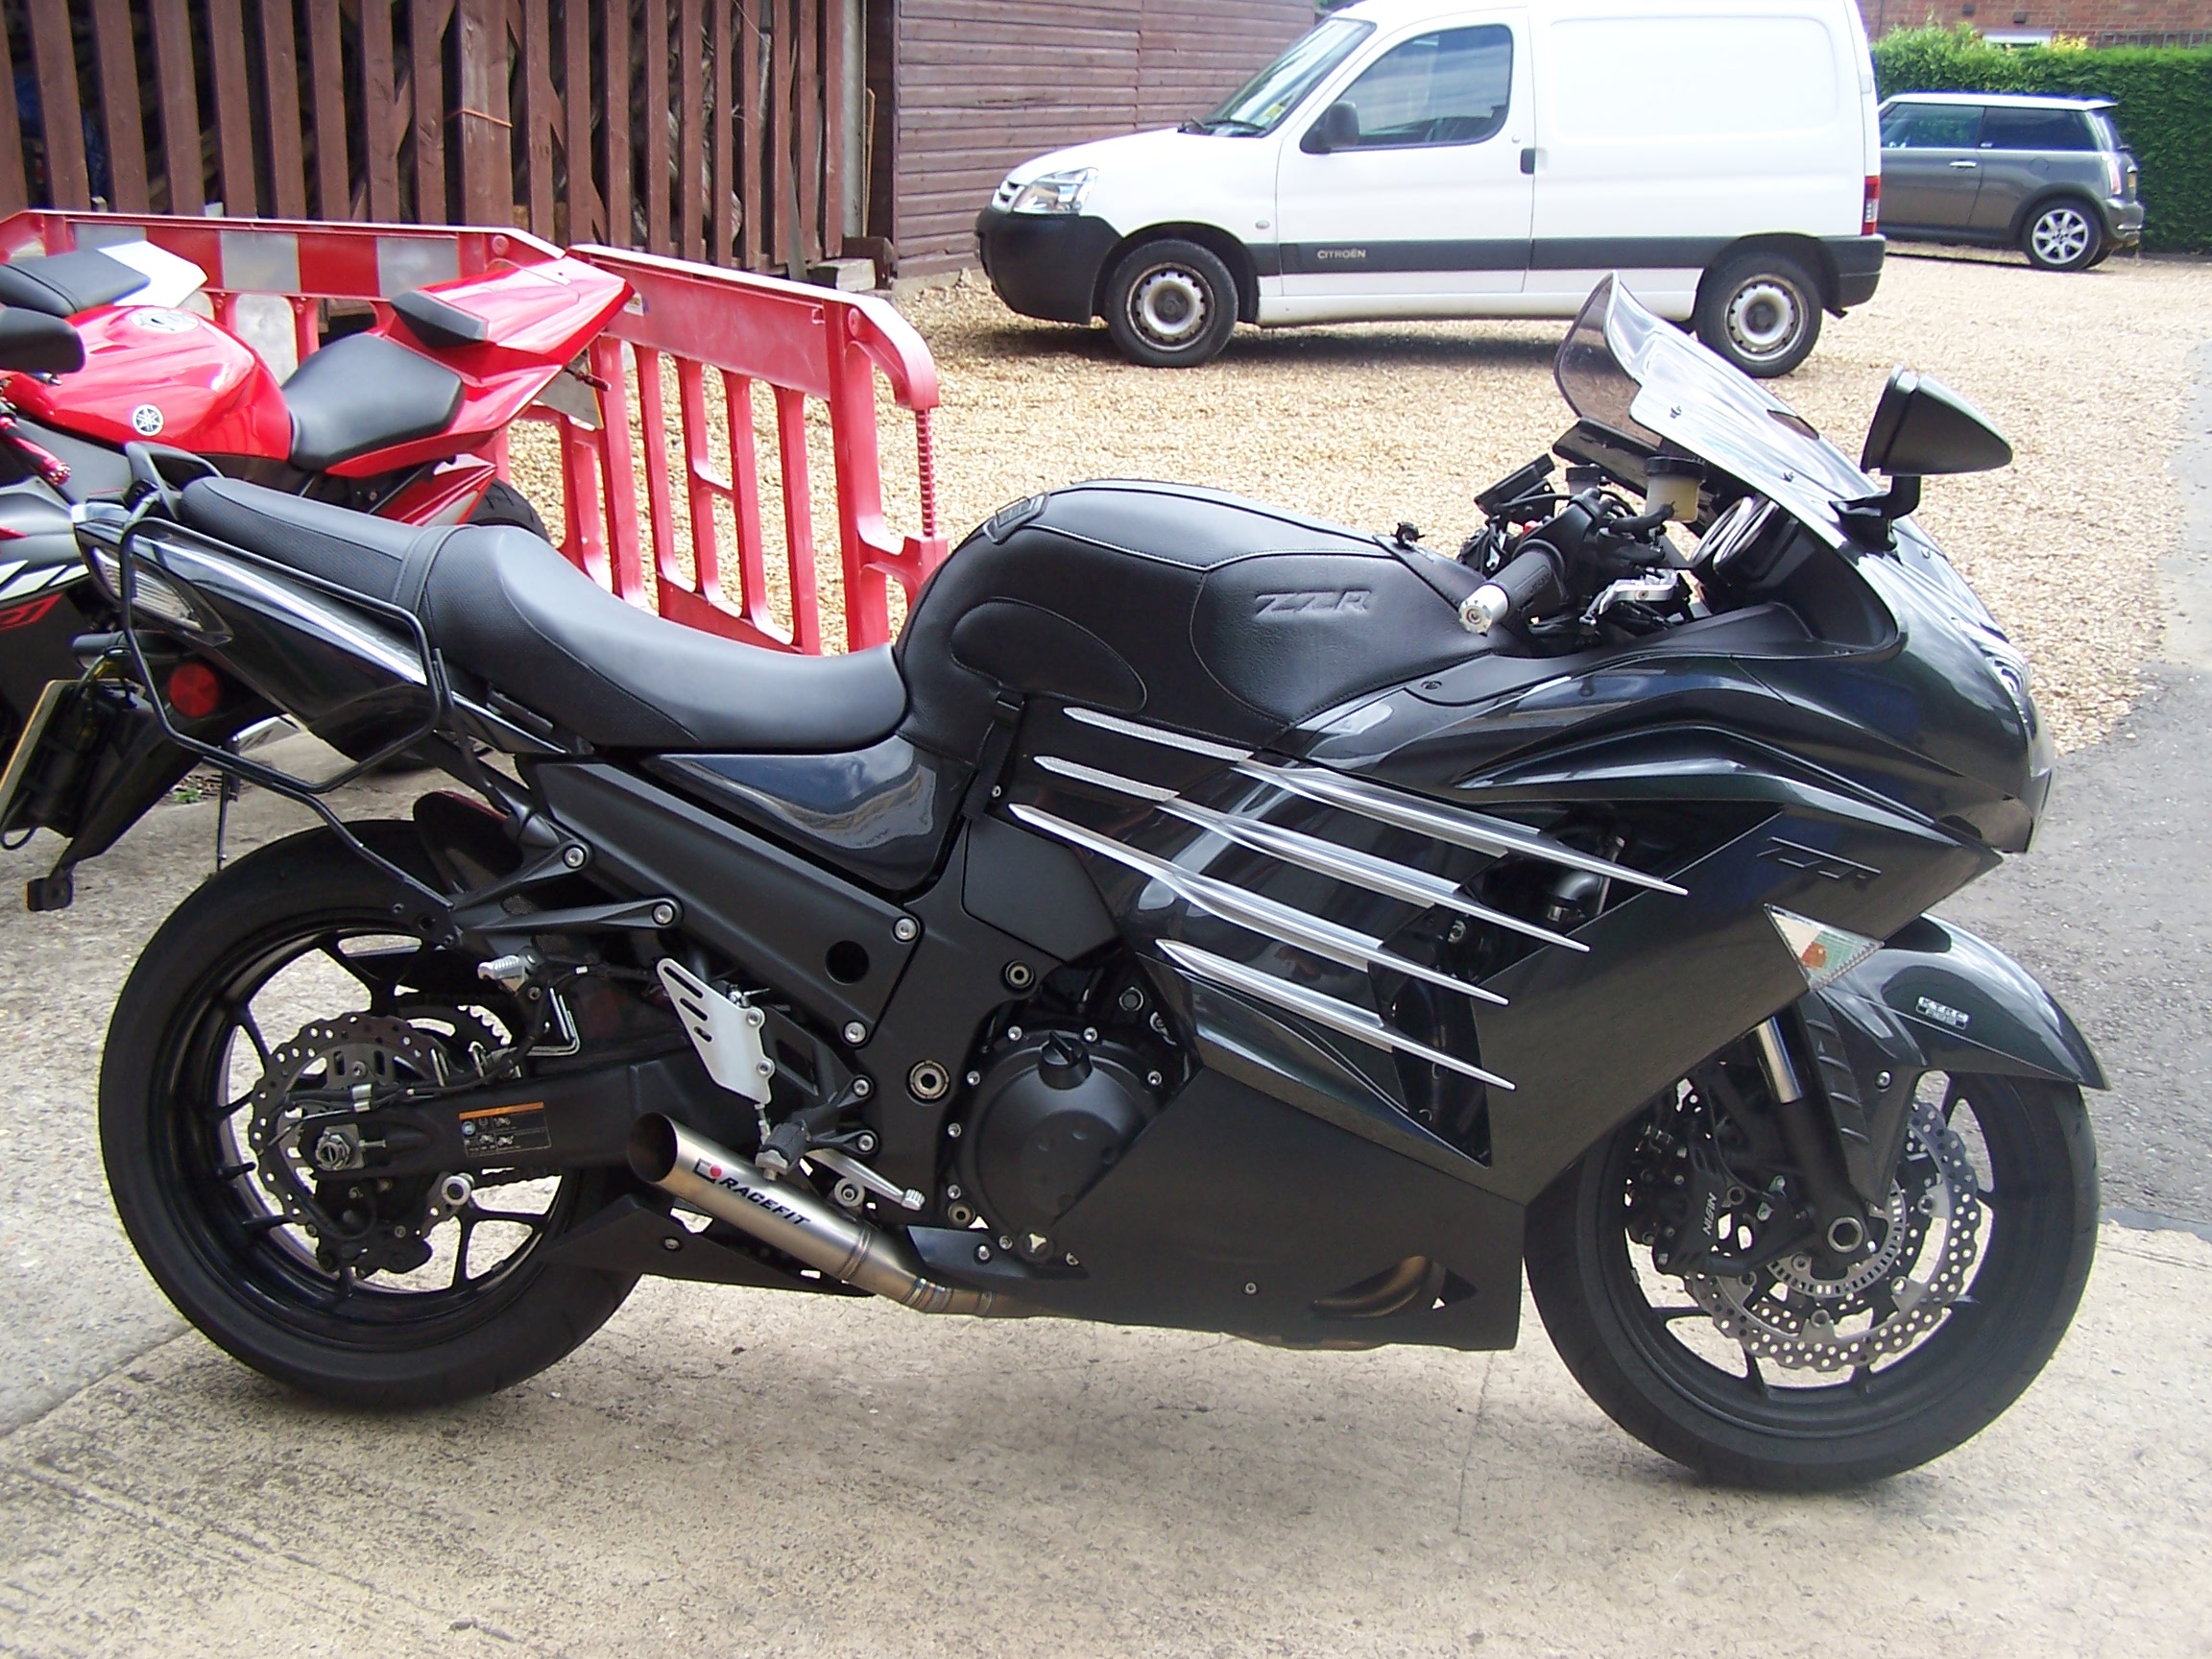 2017 ZZR1400 ECU remap – noisy, but 200bhp at the back wheel not to be sneezed at!